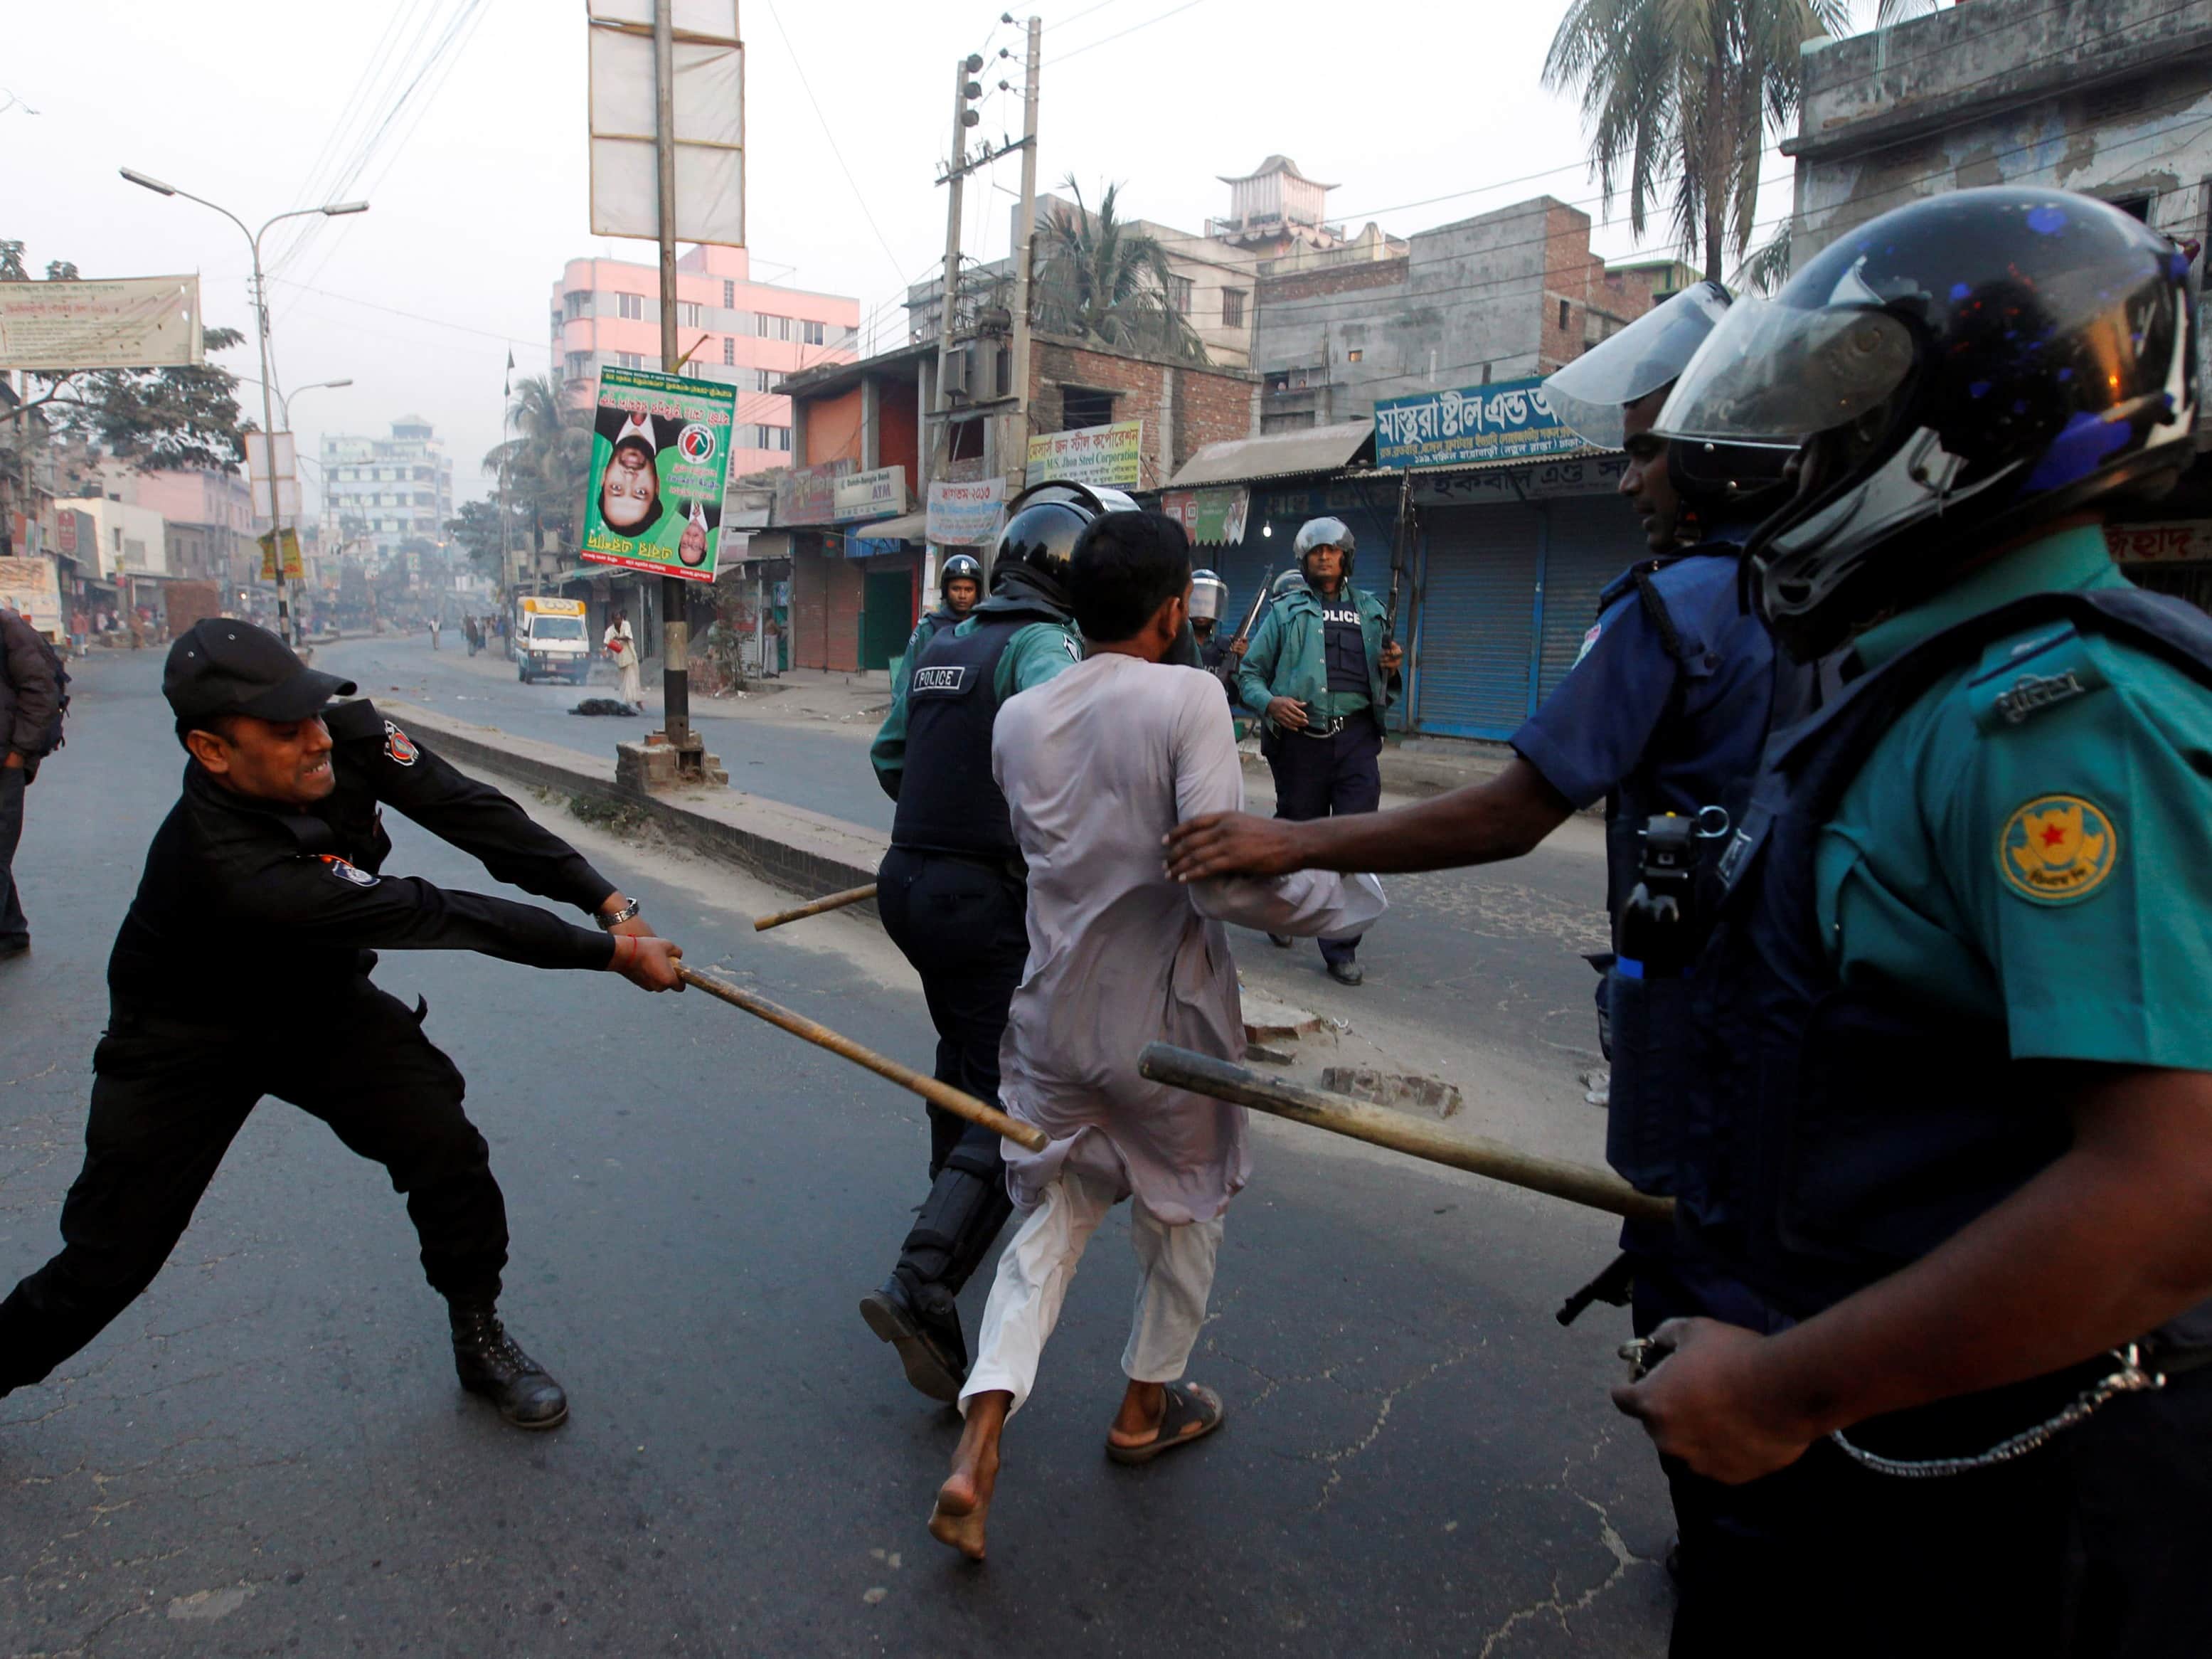 A member of the Rapid Action Battalion (RAB) swings a baton at a Jamaat-e-Islam activist on 5 February 2013, during a day-long strike in Dhaka, REUTERS/Andrew Biraj